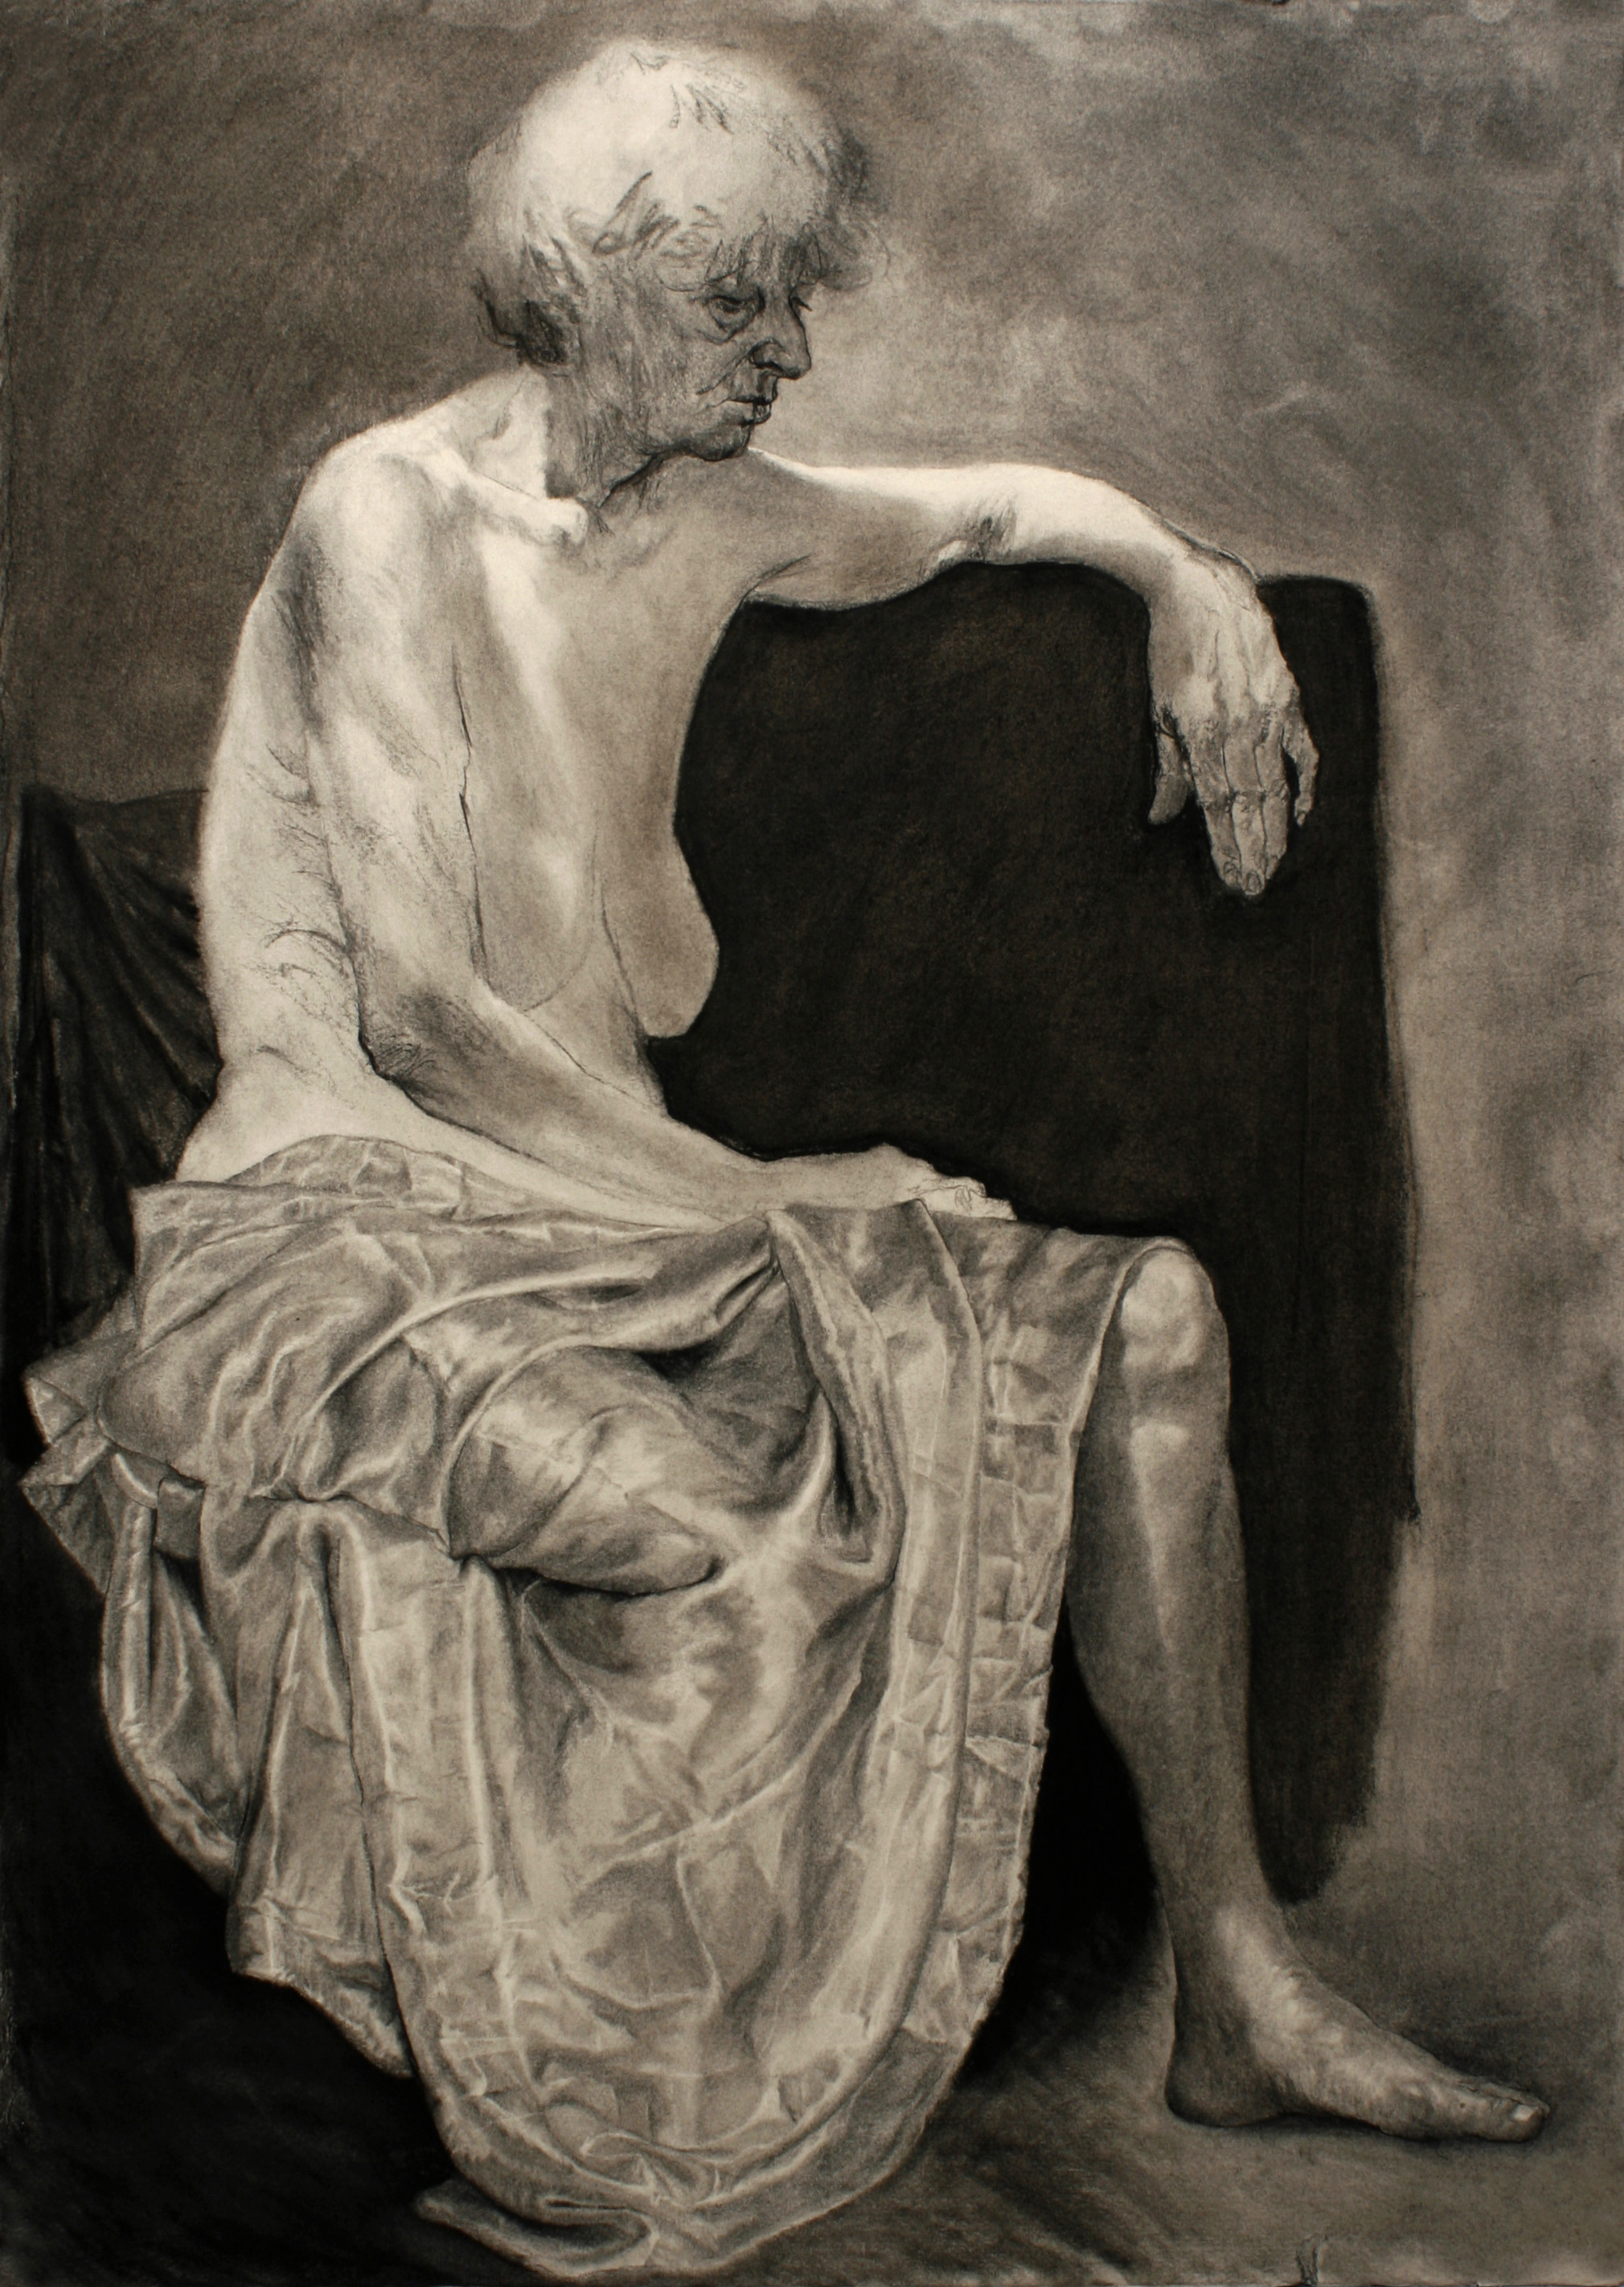 Media: charcoal on paper
Size: 50x70cm.